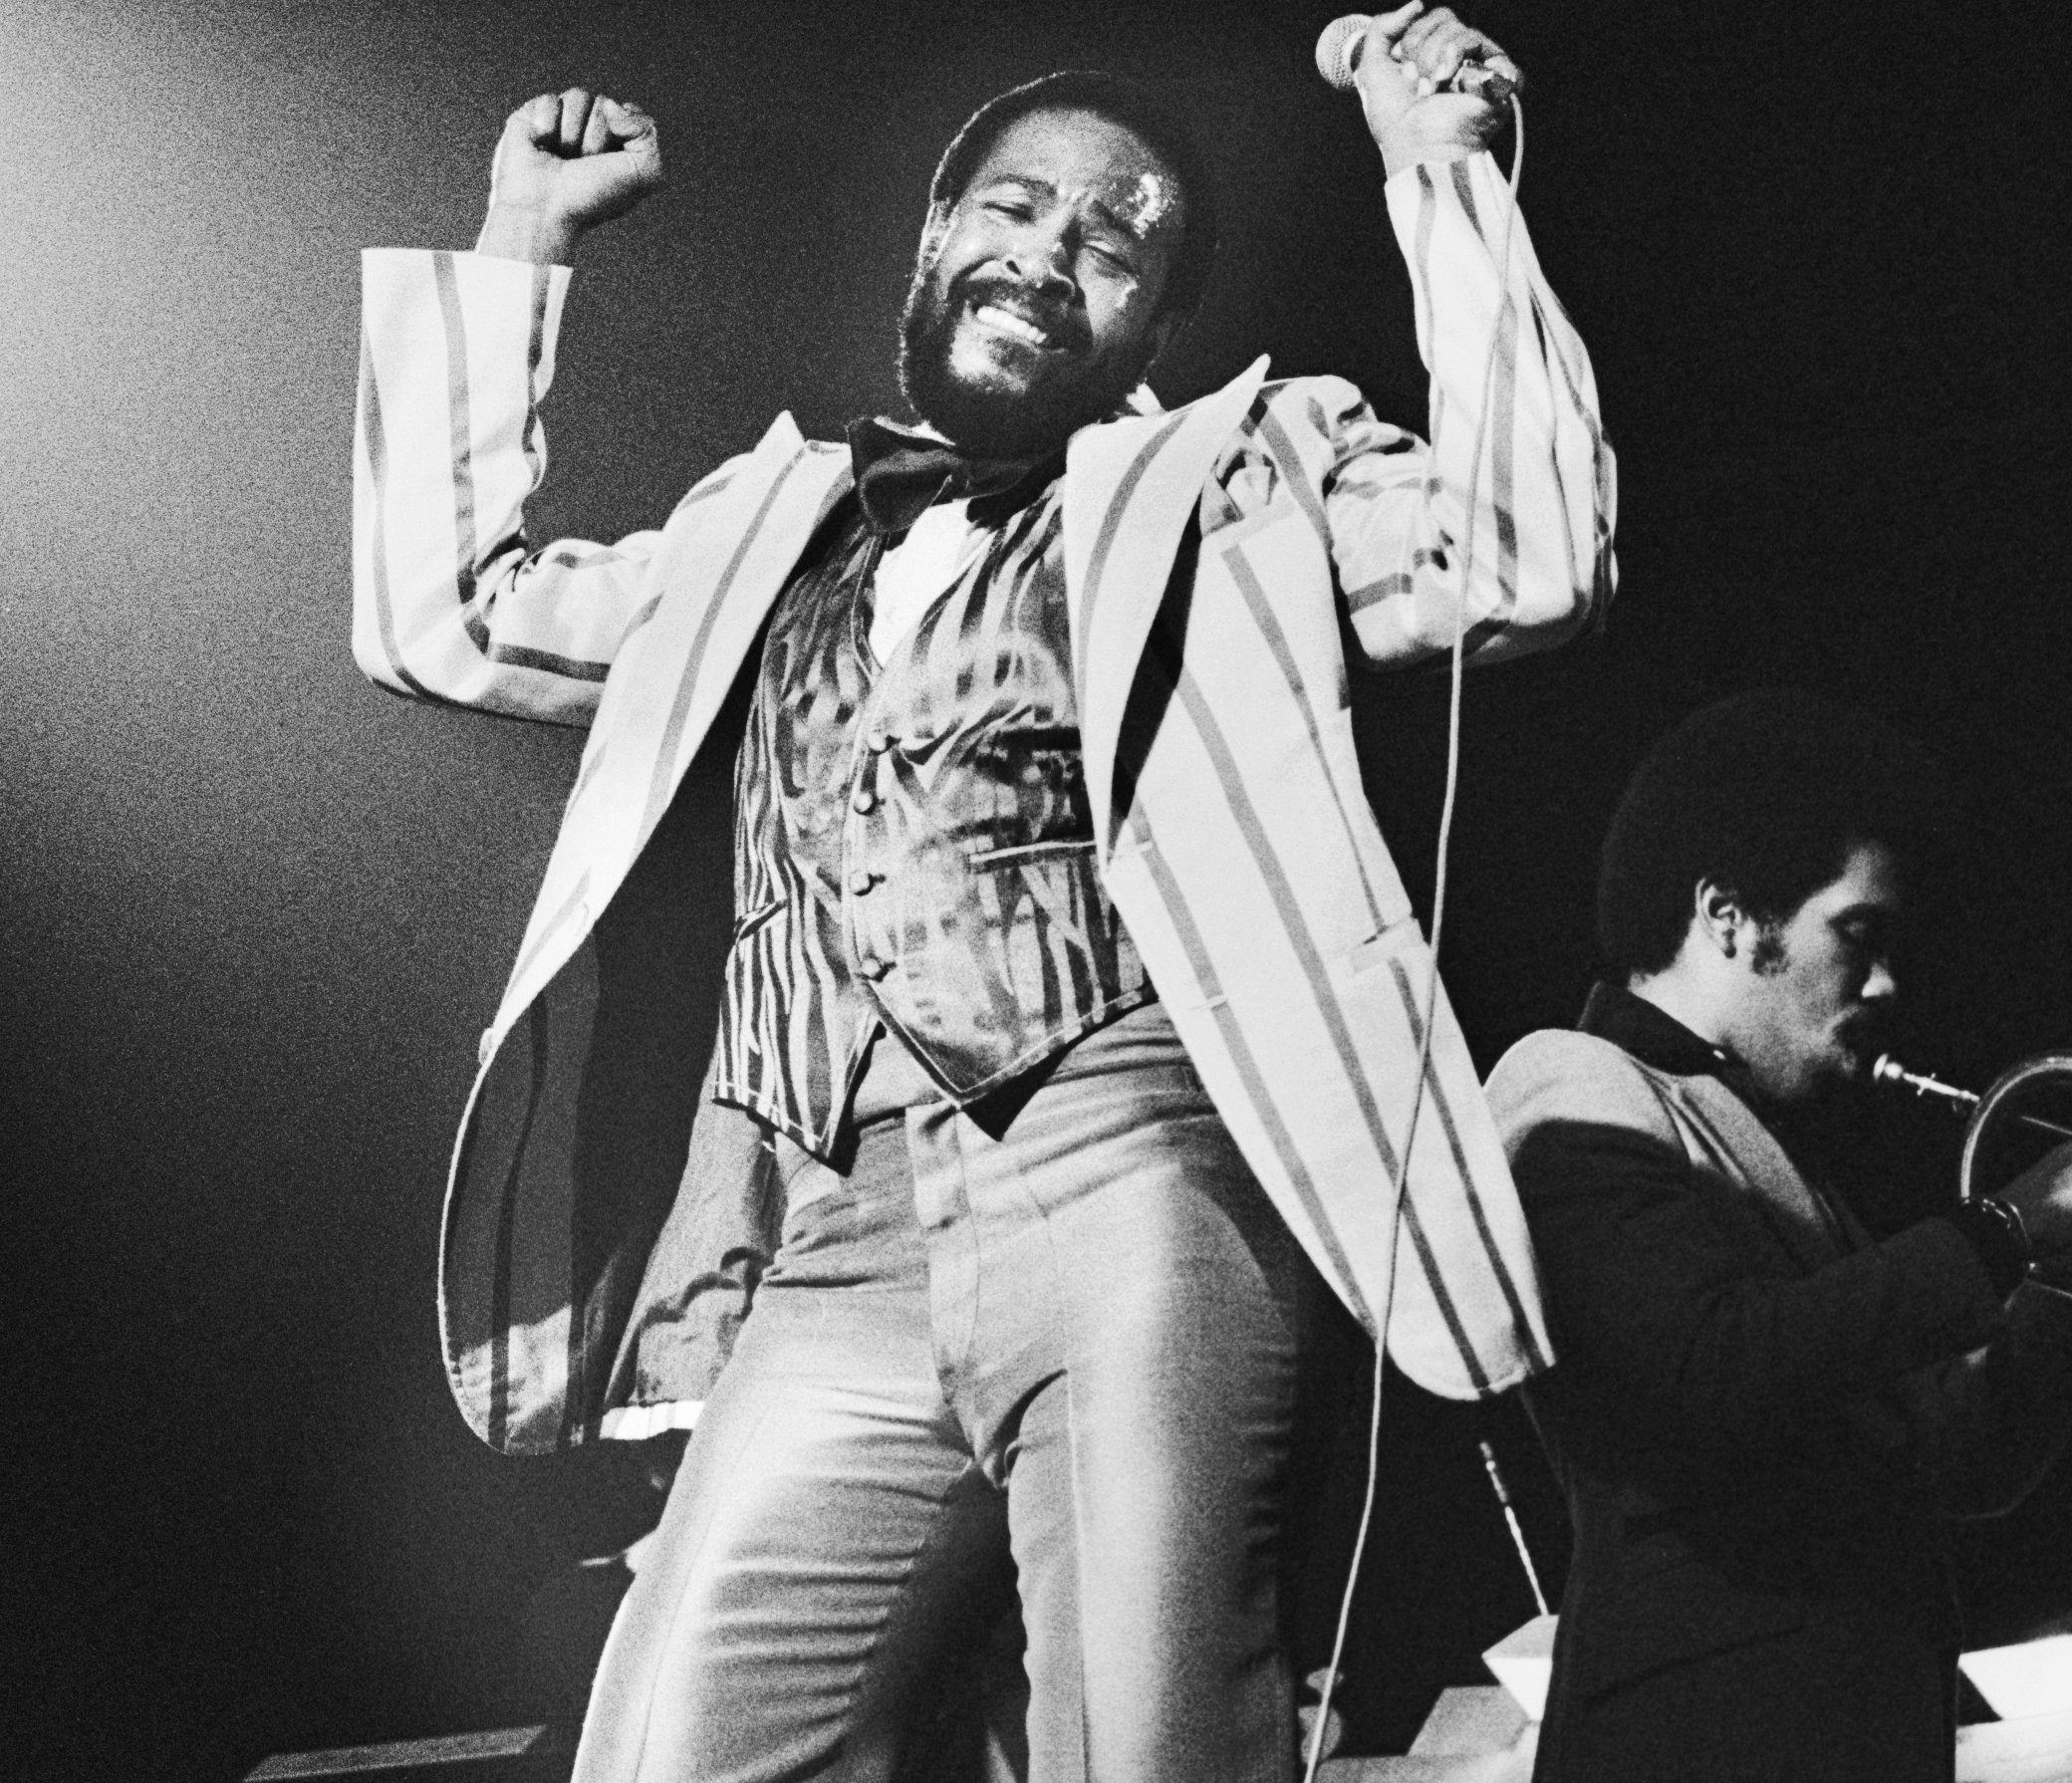 Marvin Gaye singing songs with a microphone